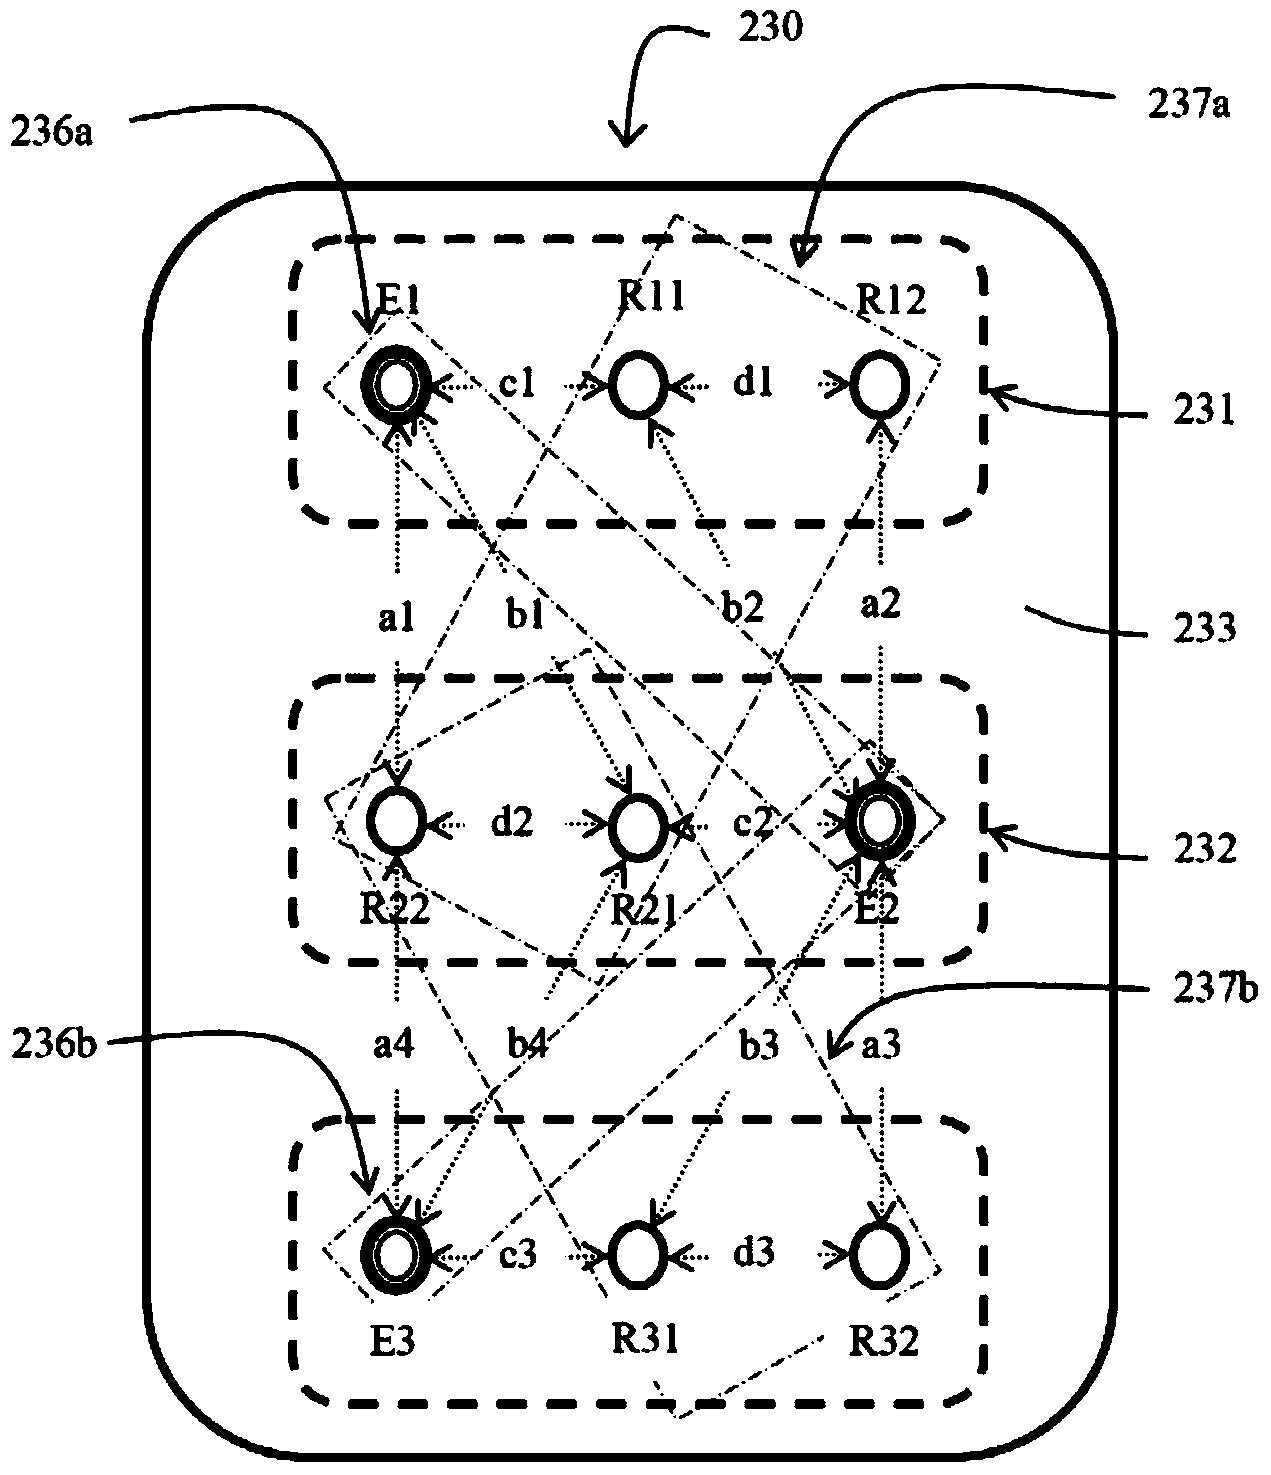 Parallel near-infrared photoelectric sensing device and system and method for detecting organs and tissue of animals